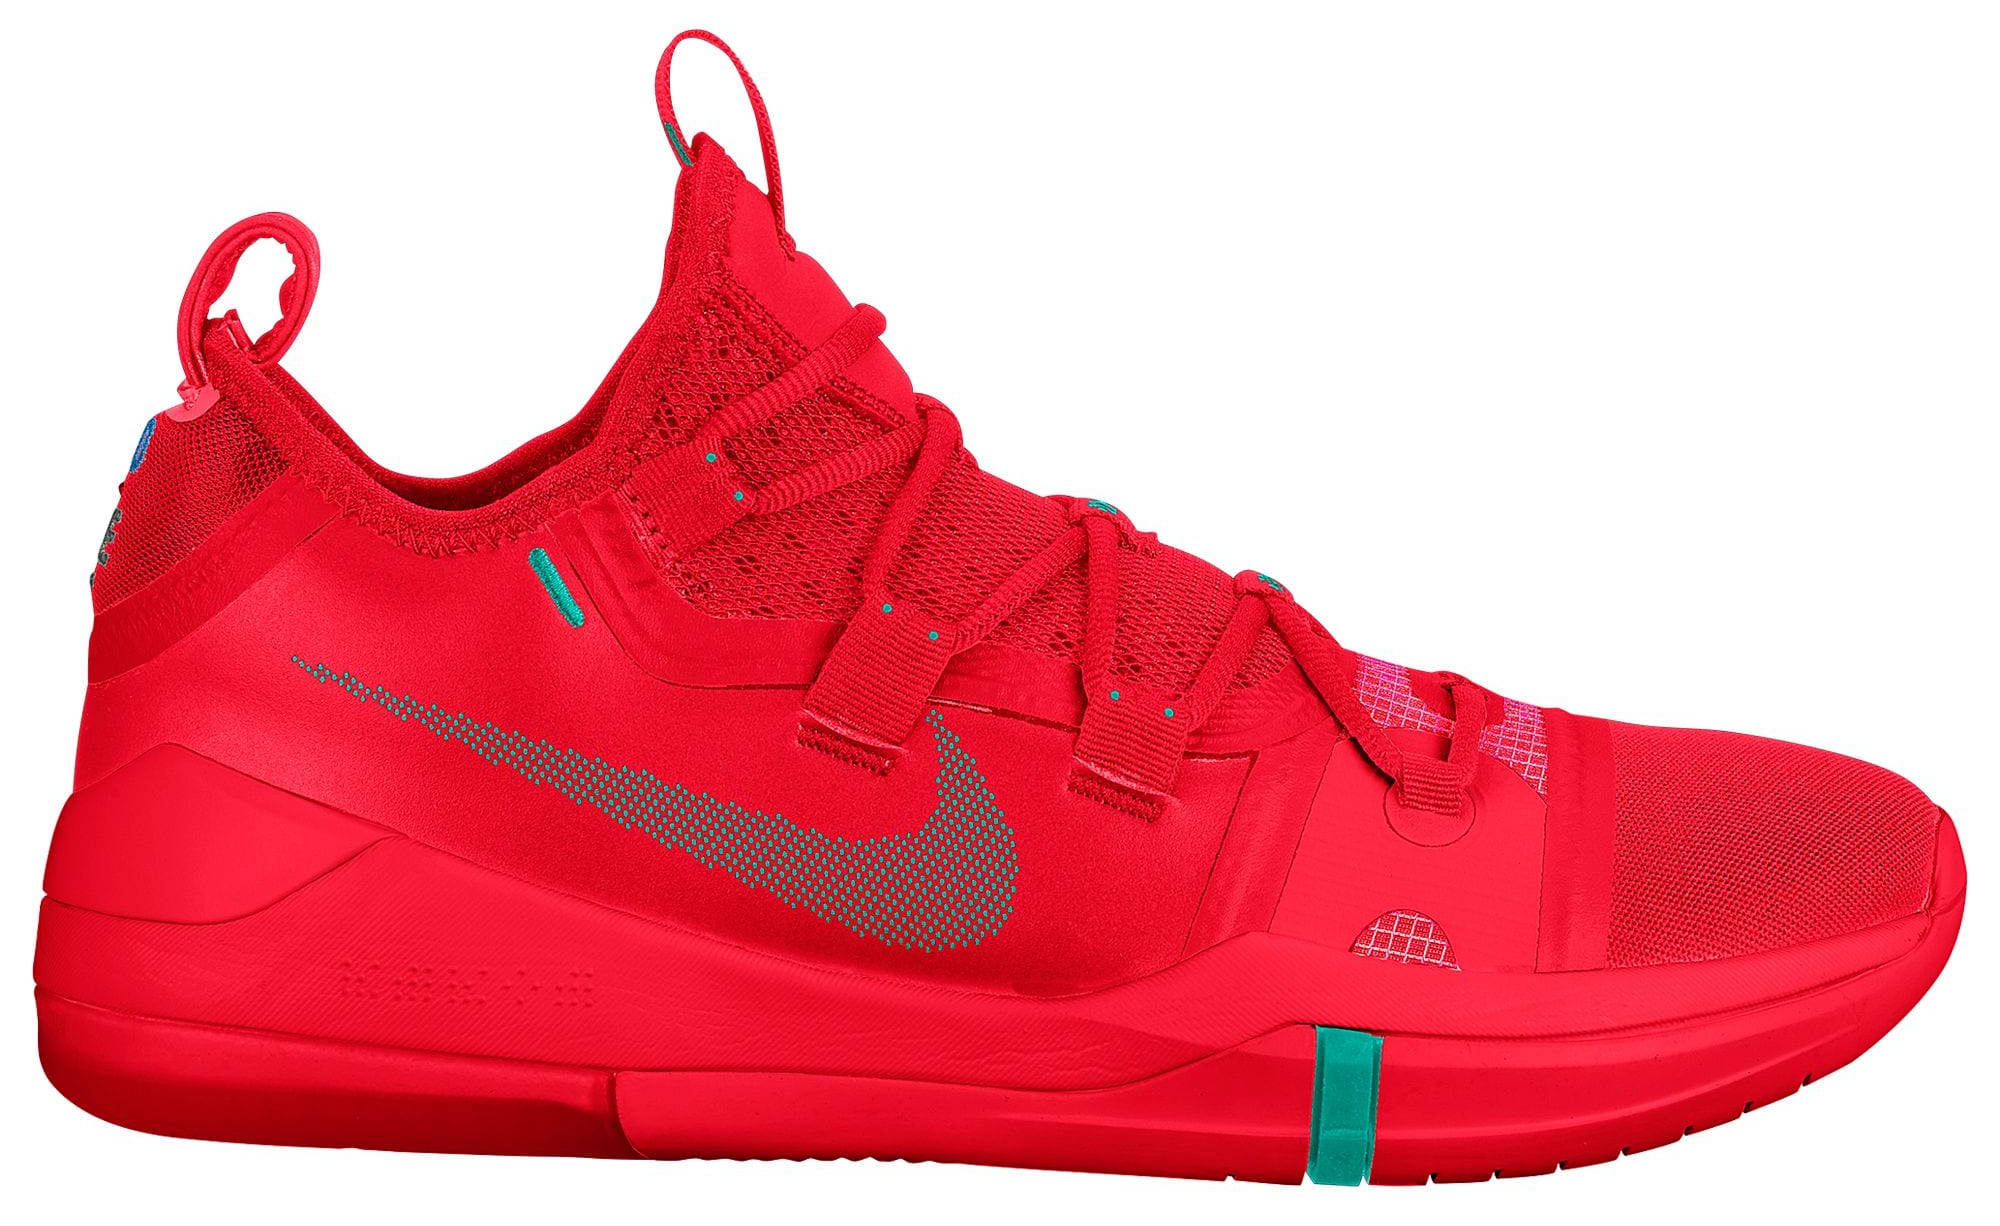 nike-kobe-ad-color-pack-red-lateral